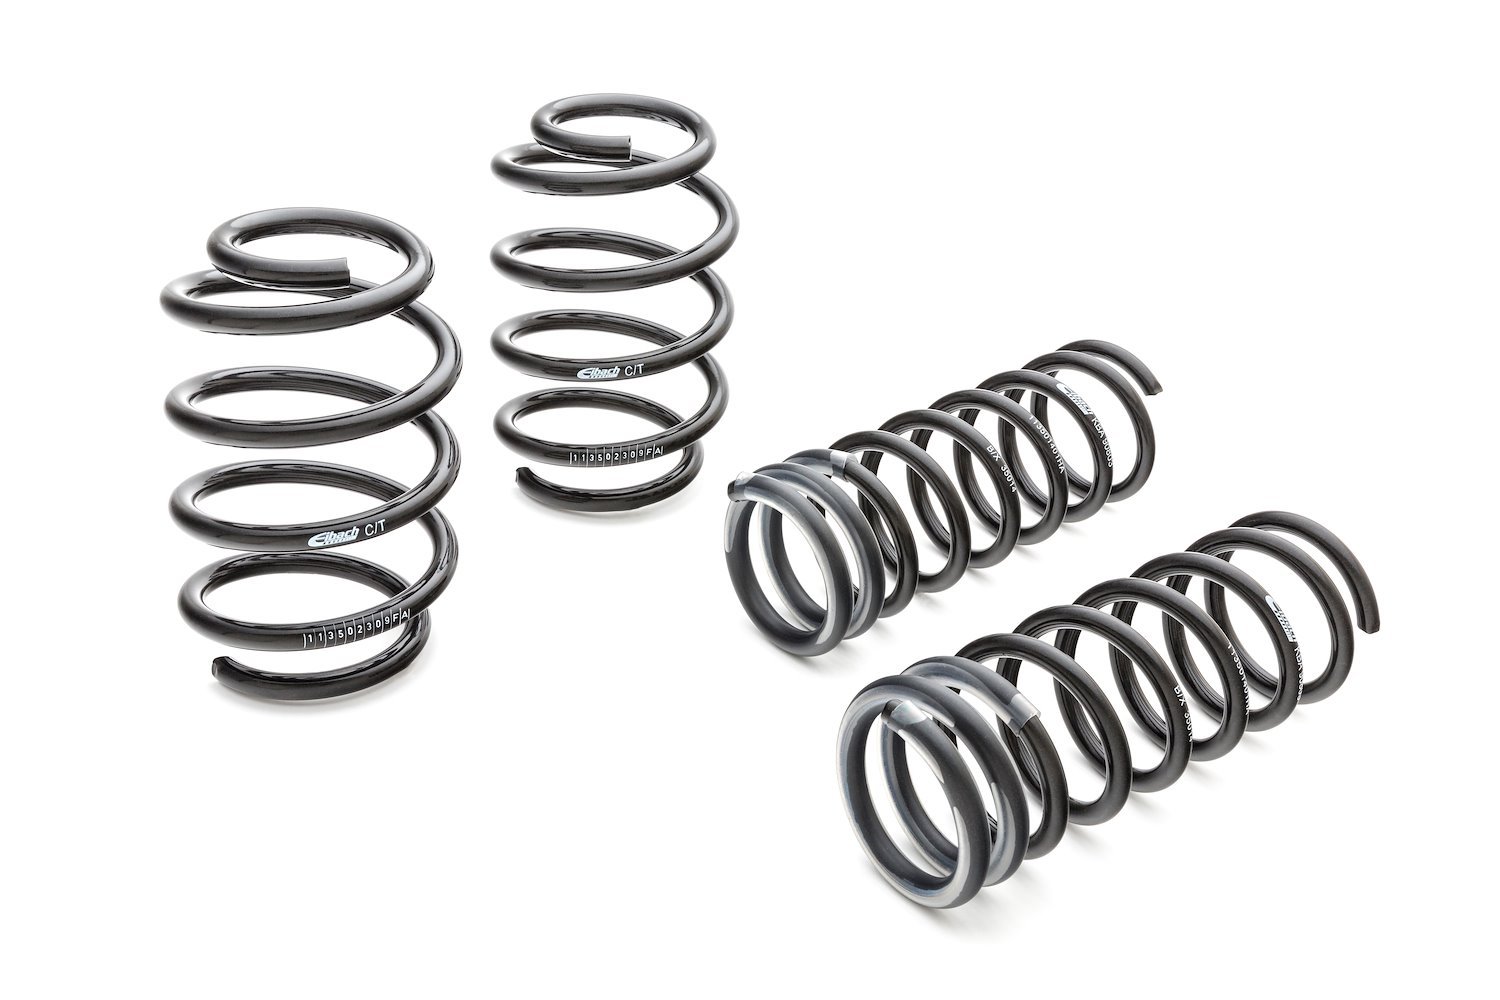 15105.140 Pro-Kit Lowering Springs 2009-2016 Audi A4/A4 Quattro